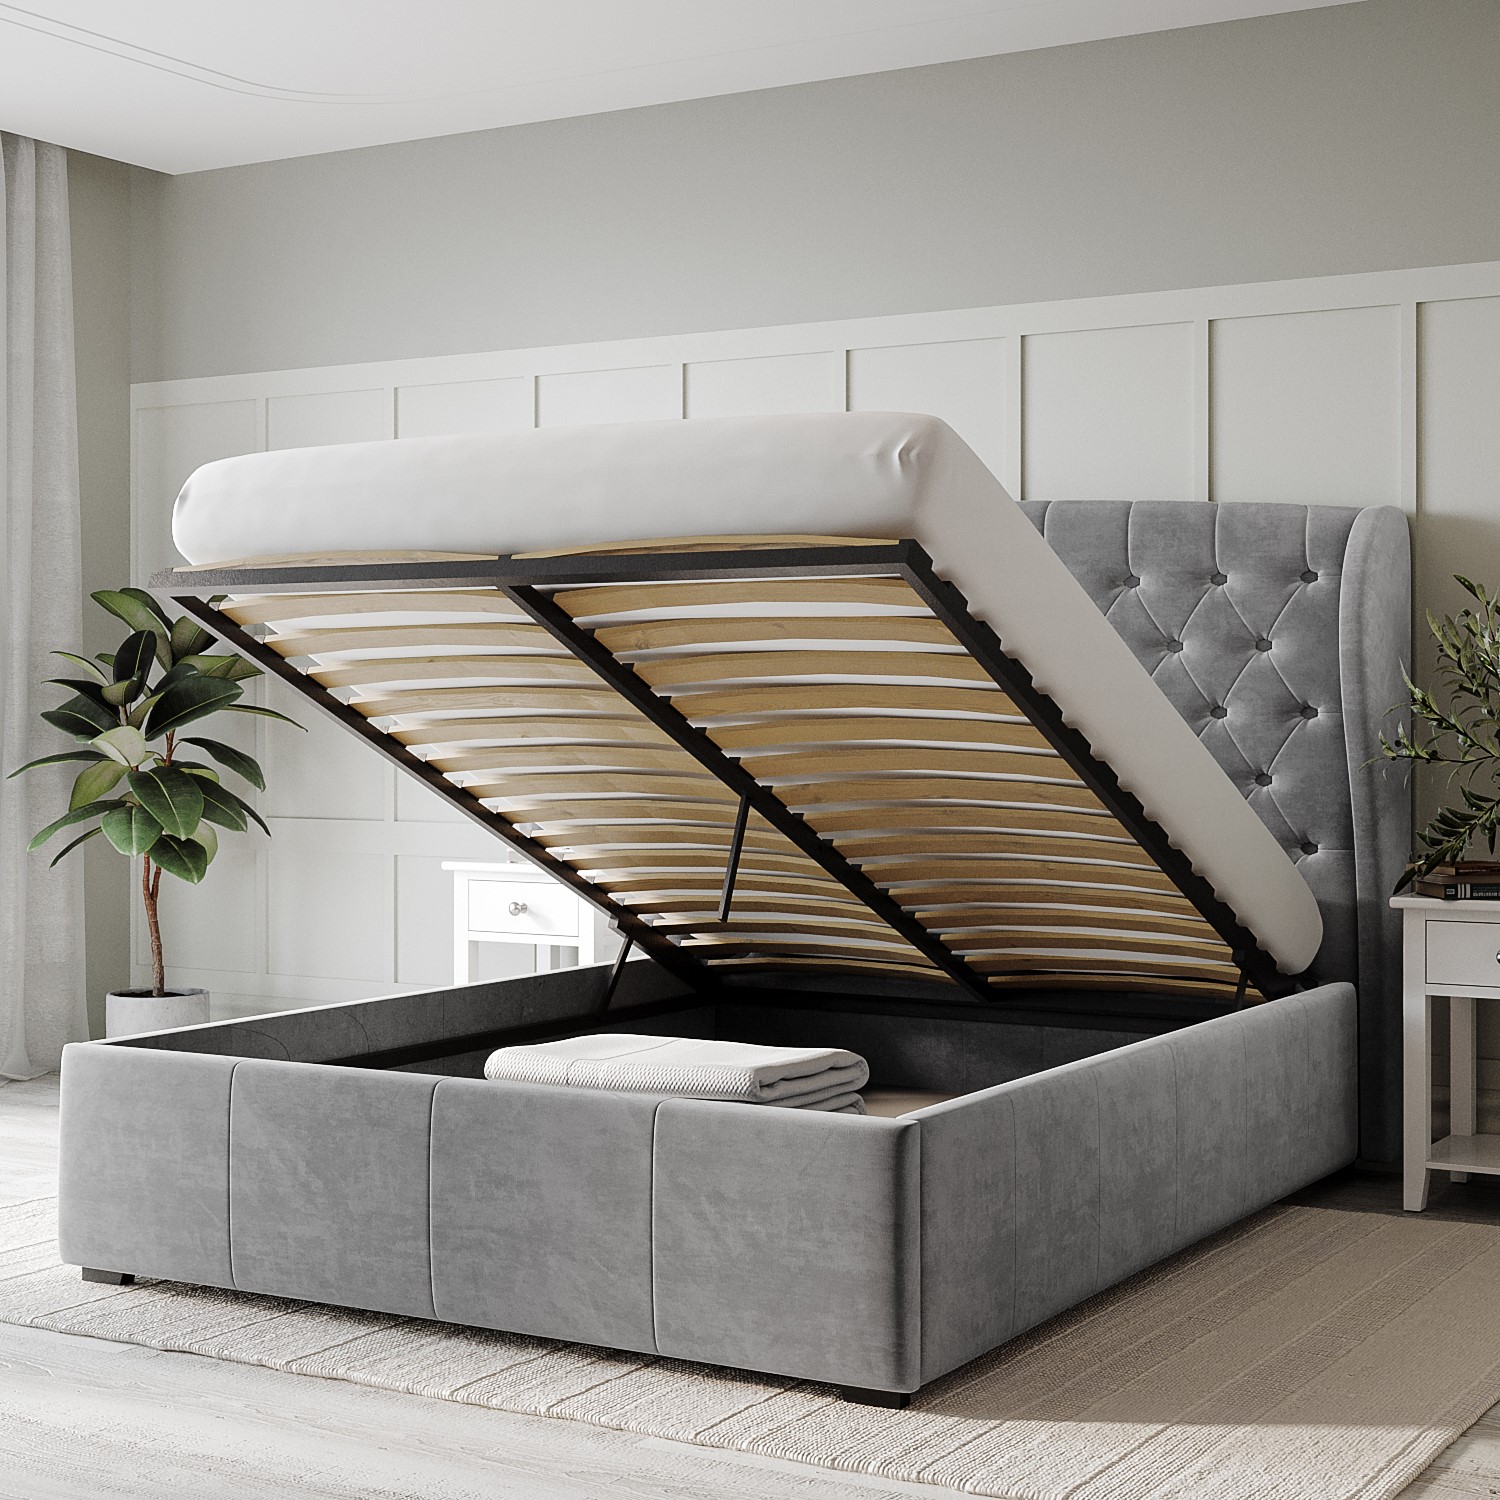 Read more about Grey velvet double ottoman bed with winged headboard safina